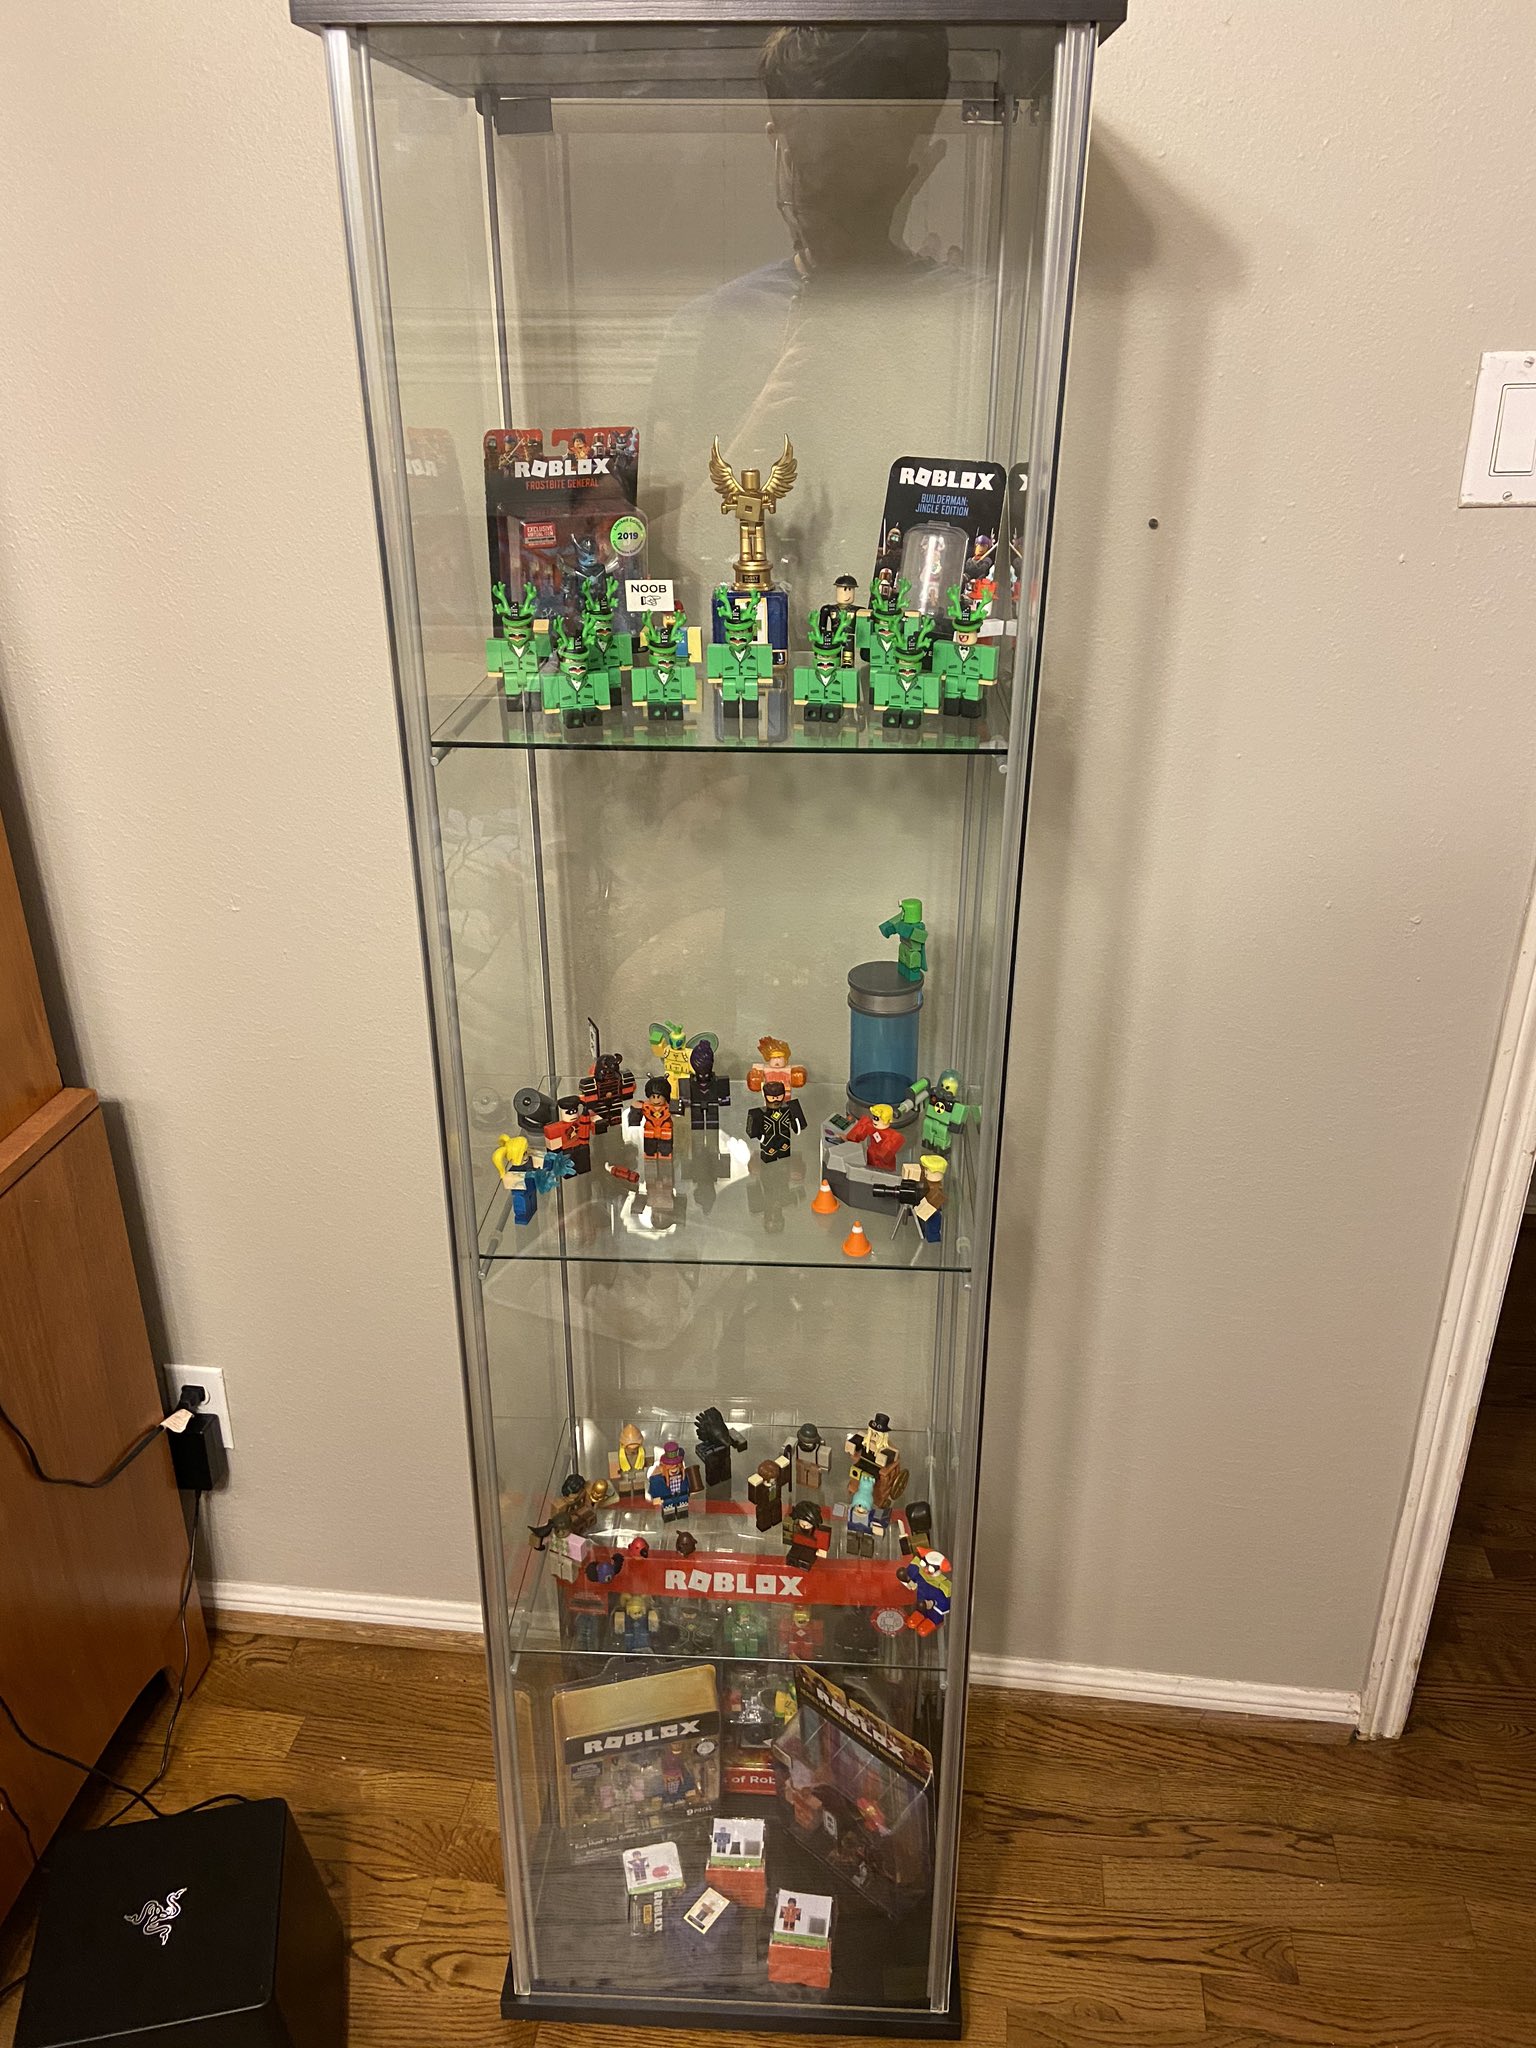 Luke Tesarek On Twitter Finally Got Some Free Time Last Night So My Sister And I Set Up This Display Case For All My Roblox Toys In My Room Https T Co Z8v712dlie - roblox display case